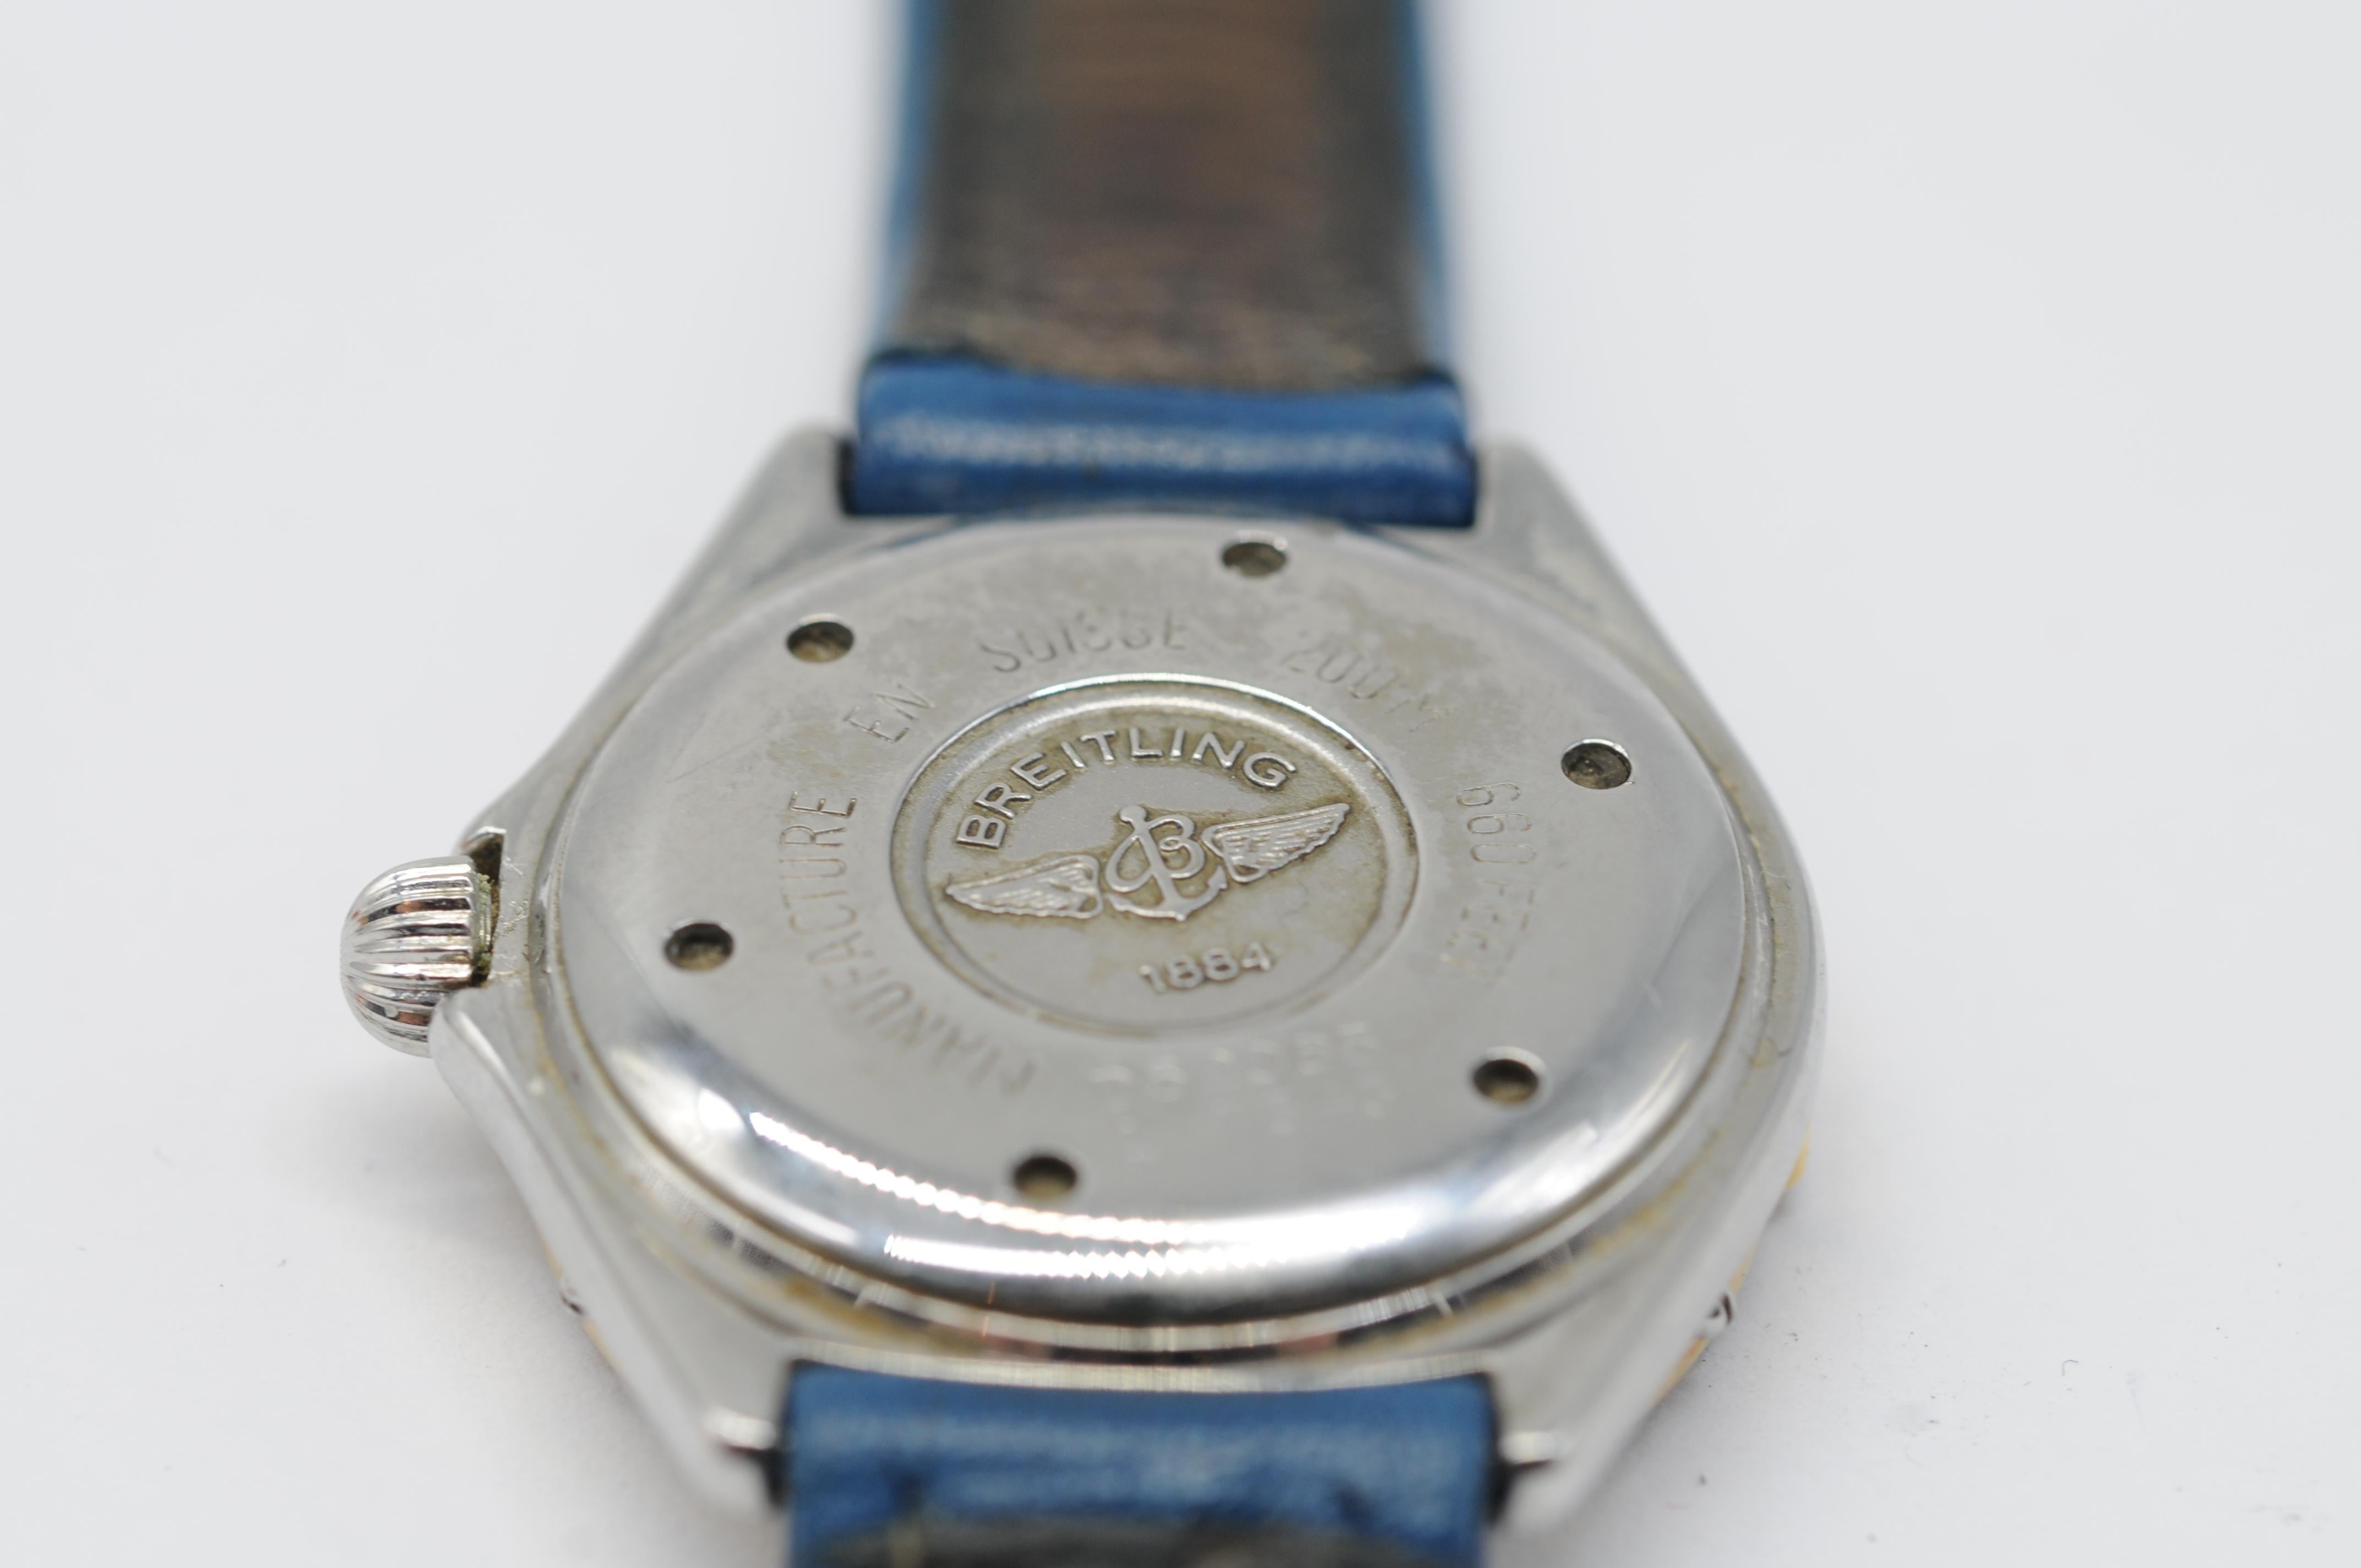 Breitling Lady J D52065 with a deep blue leather strap For Sale 13